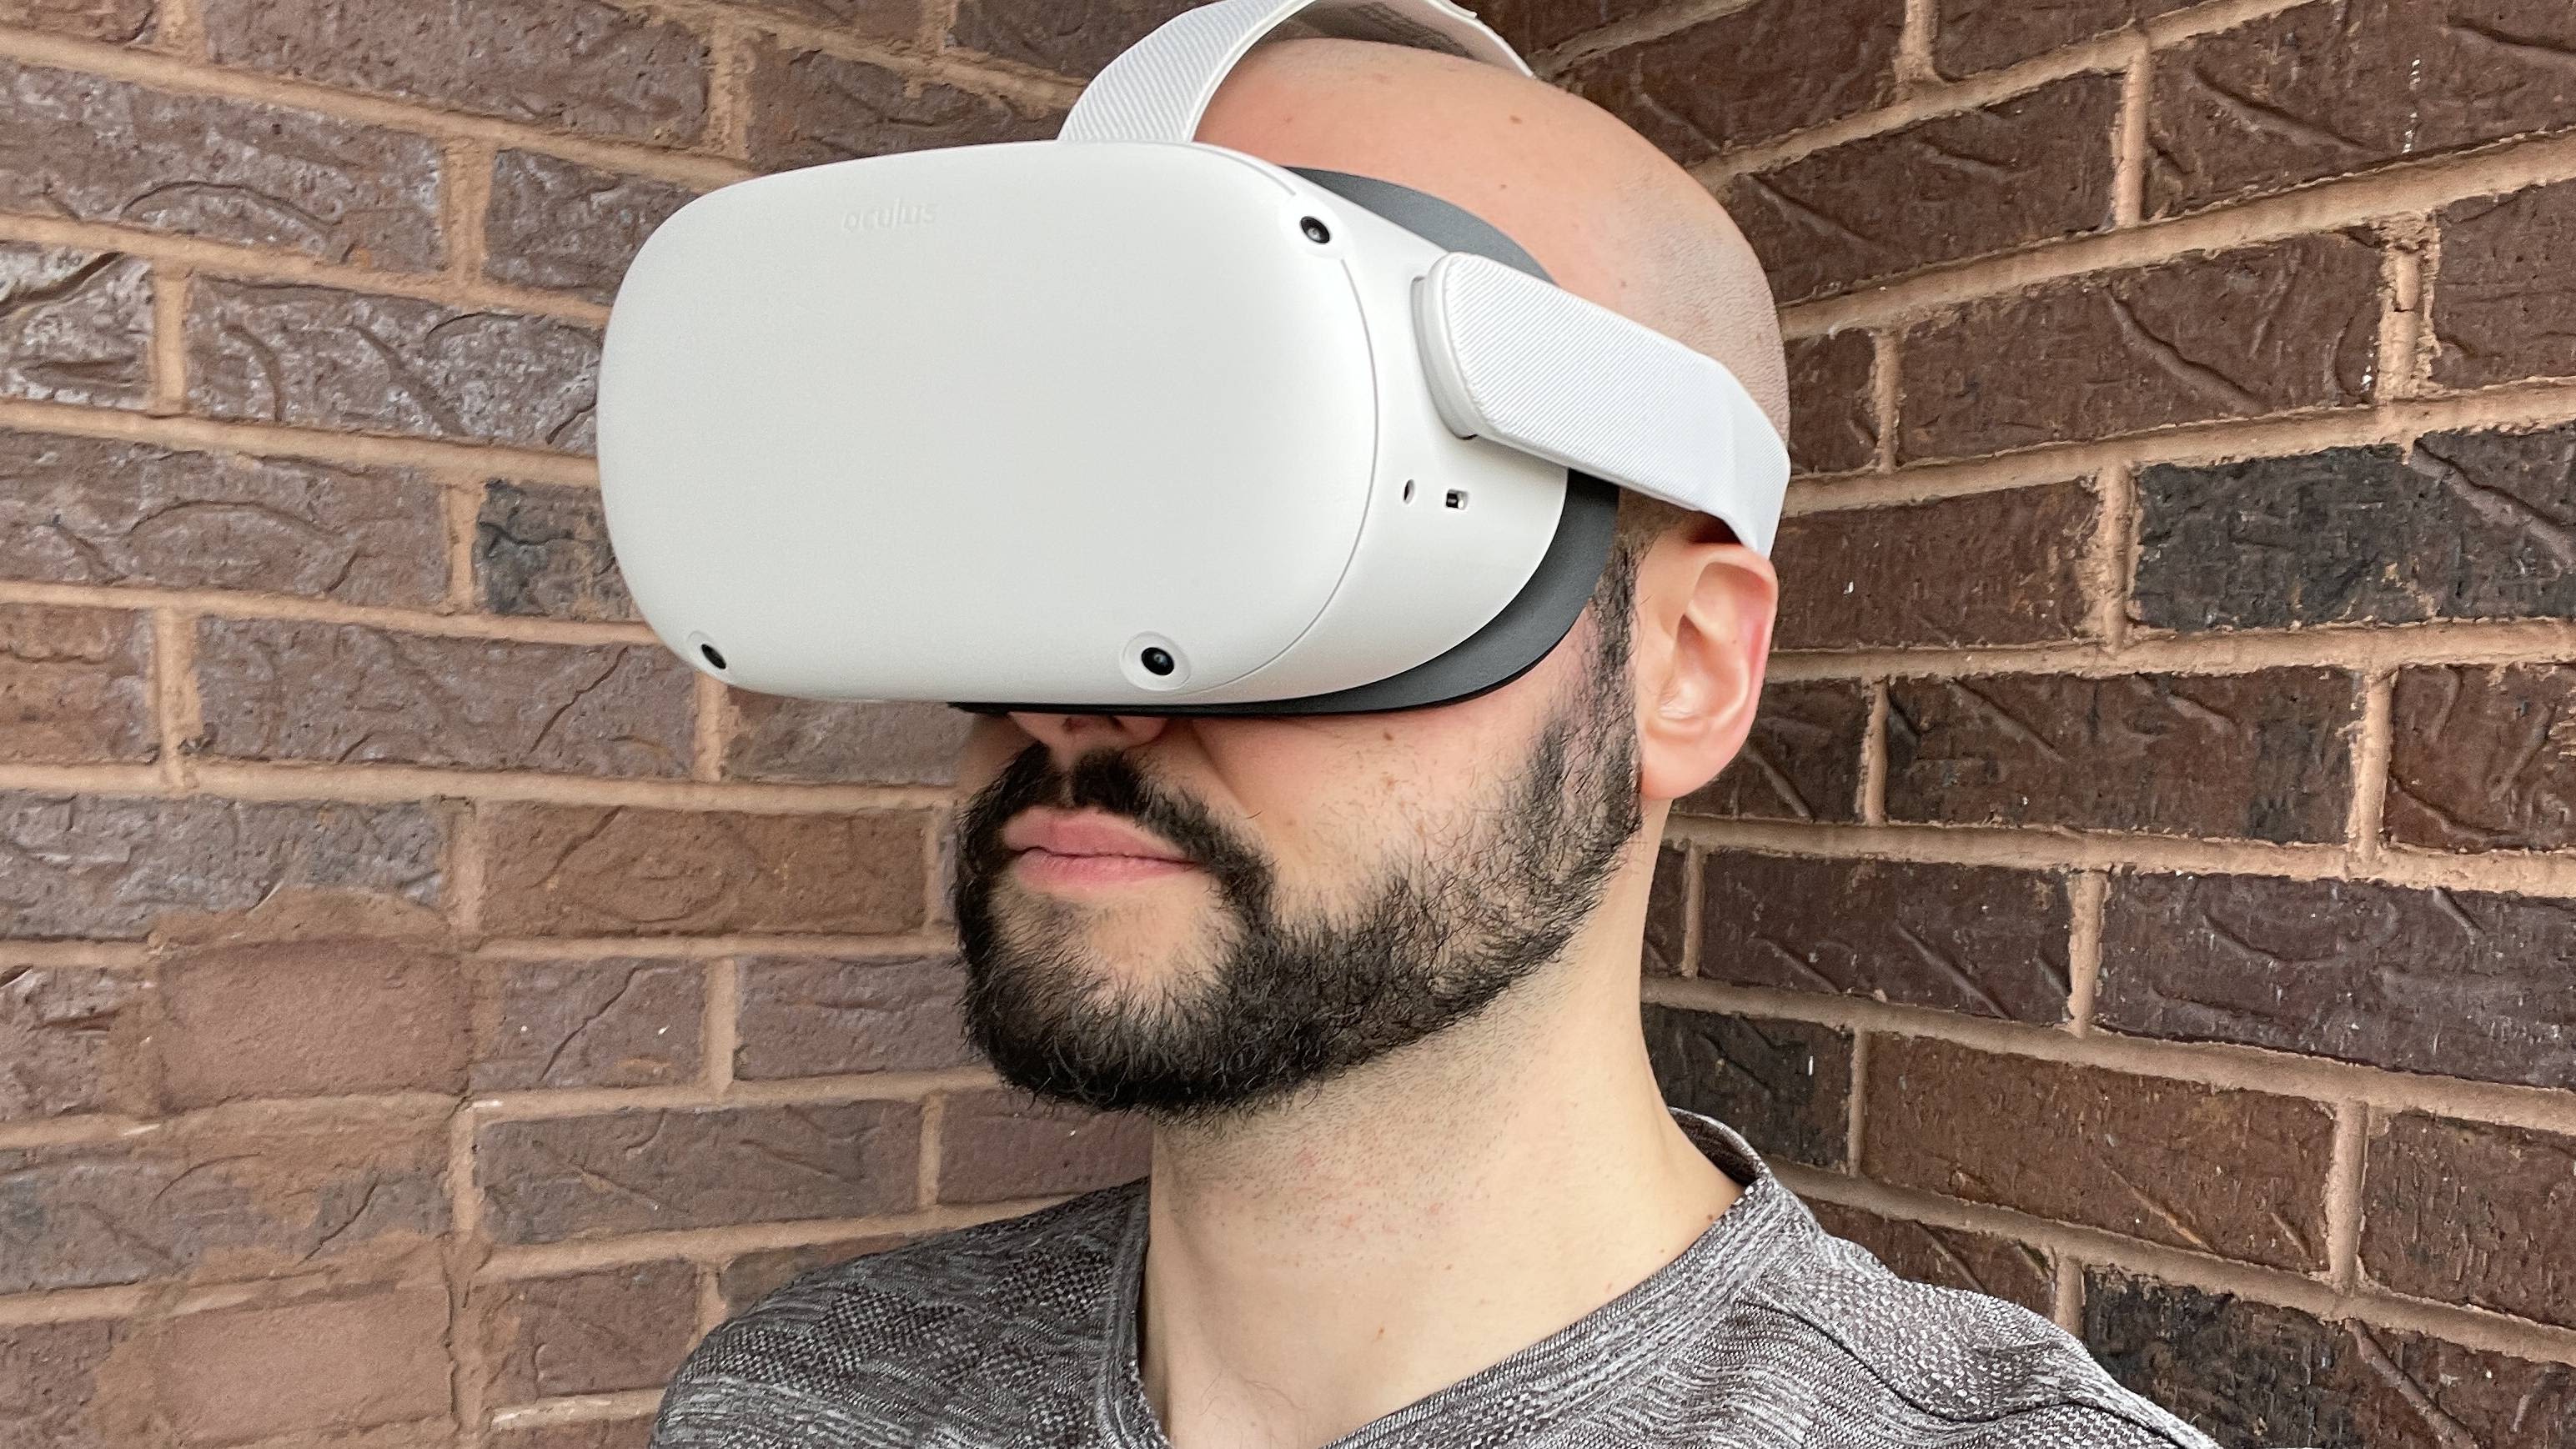 Oculus Quest 2 Black Friday Get a free gift with your headset | CNN Underscored